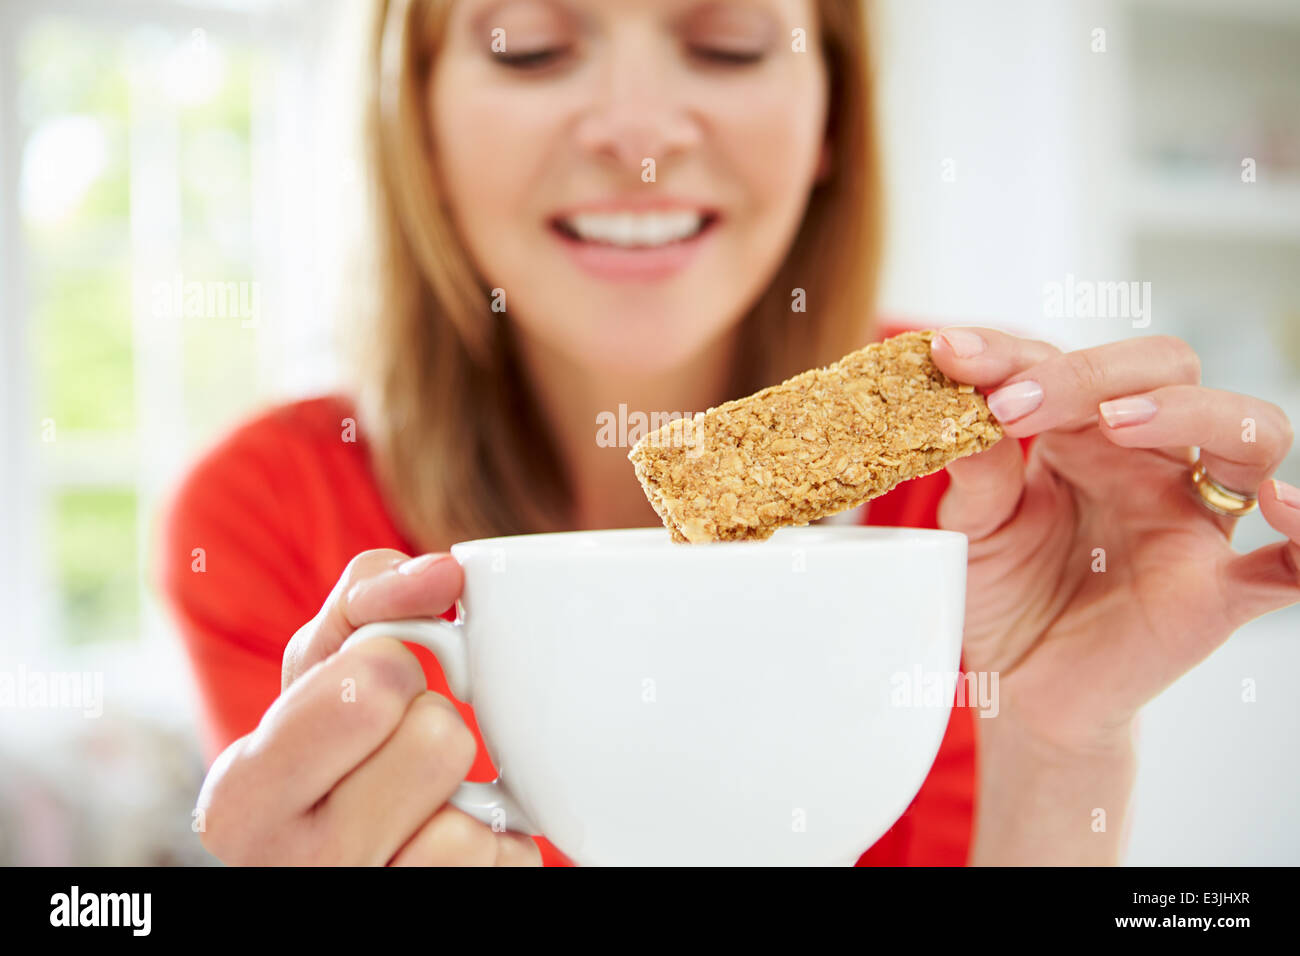 Woman Dipping Biscuit Into Hot Drink At Home Stock Photo